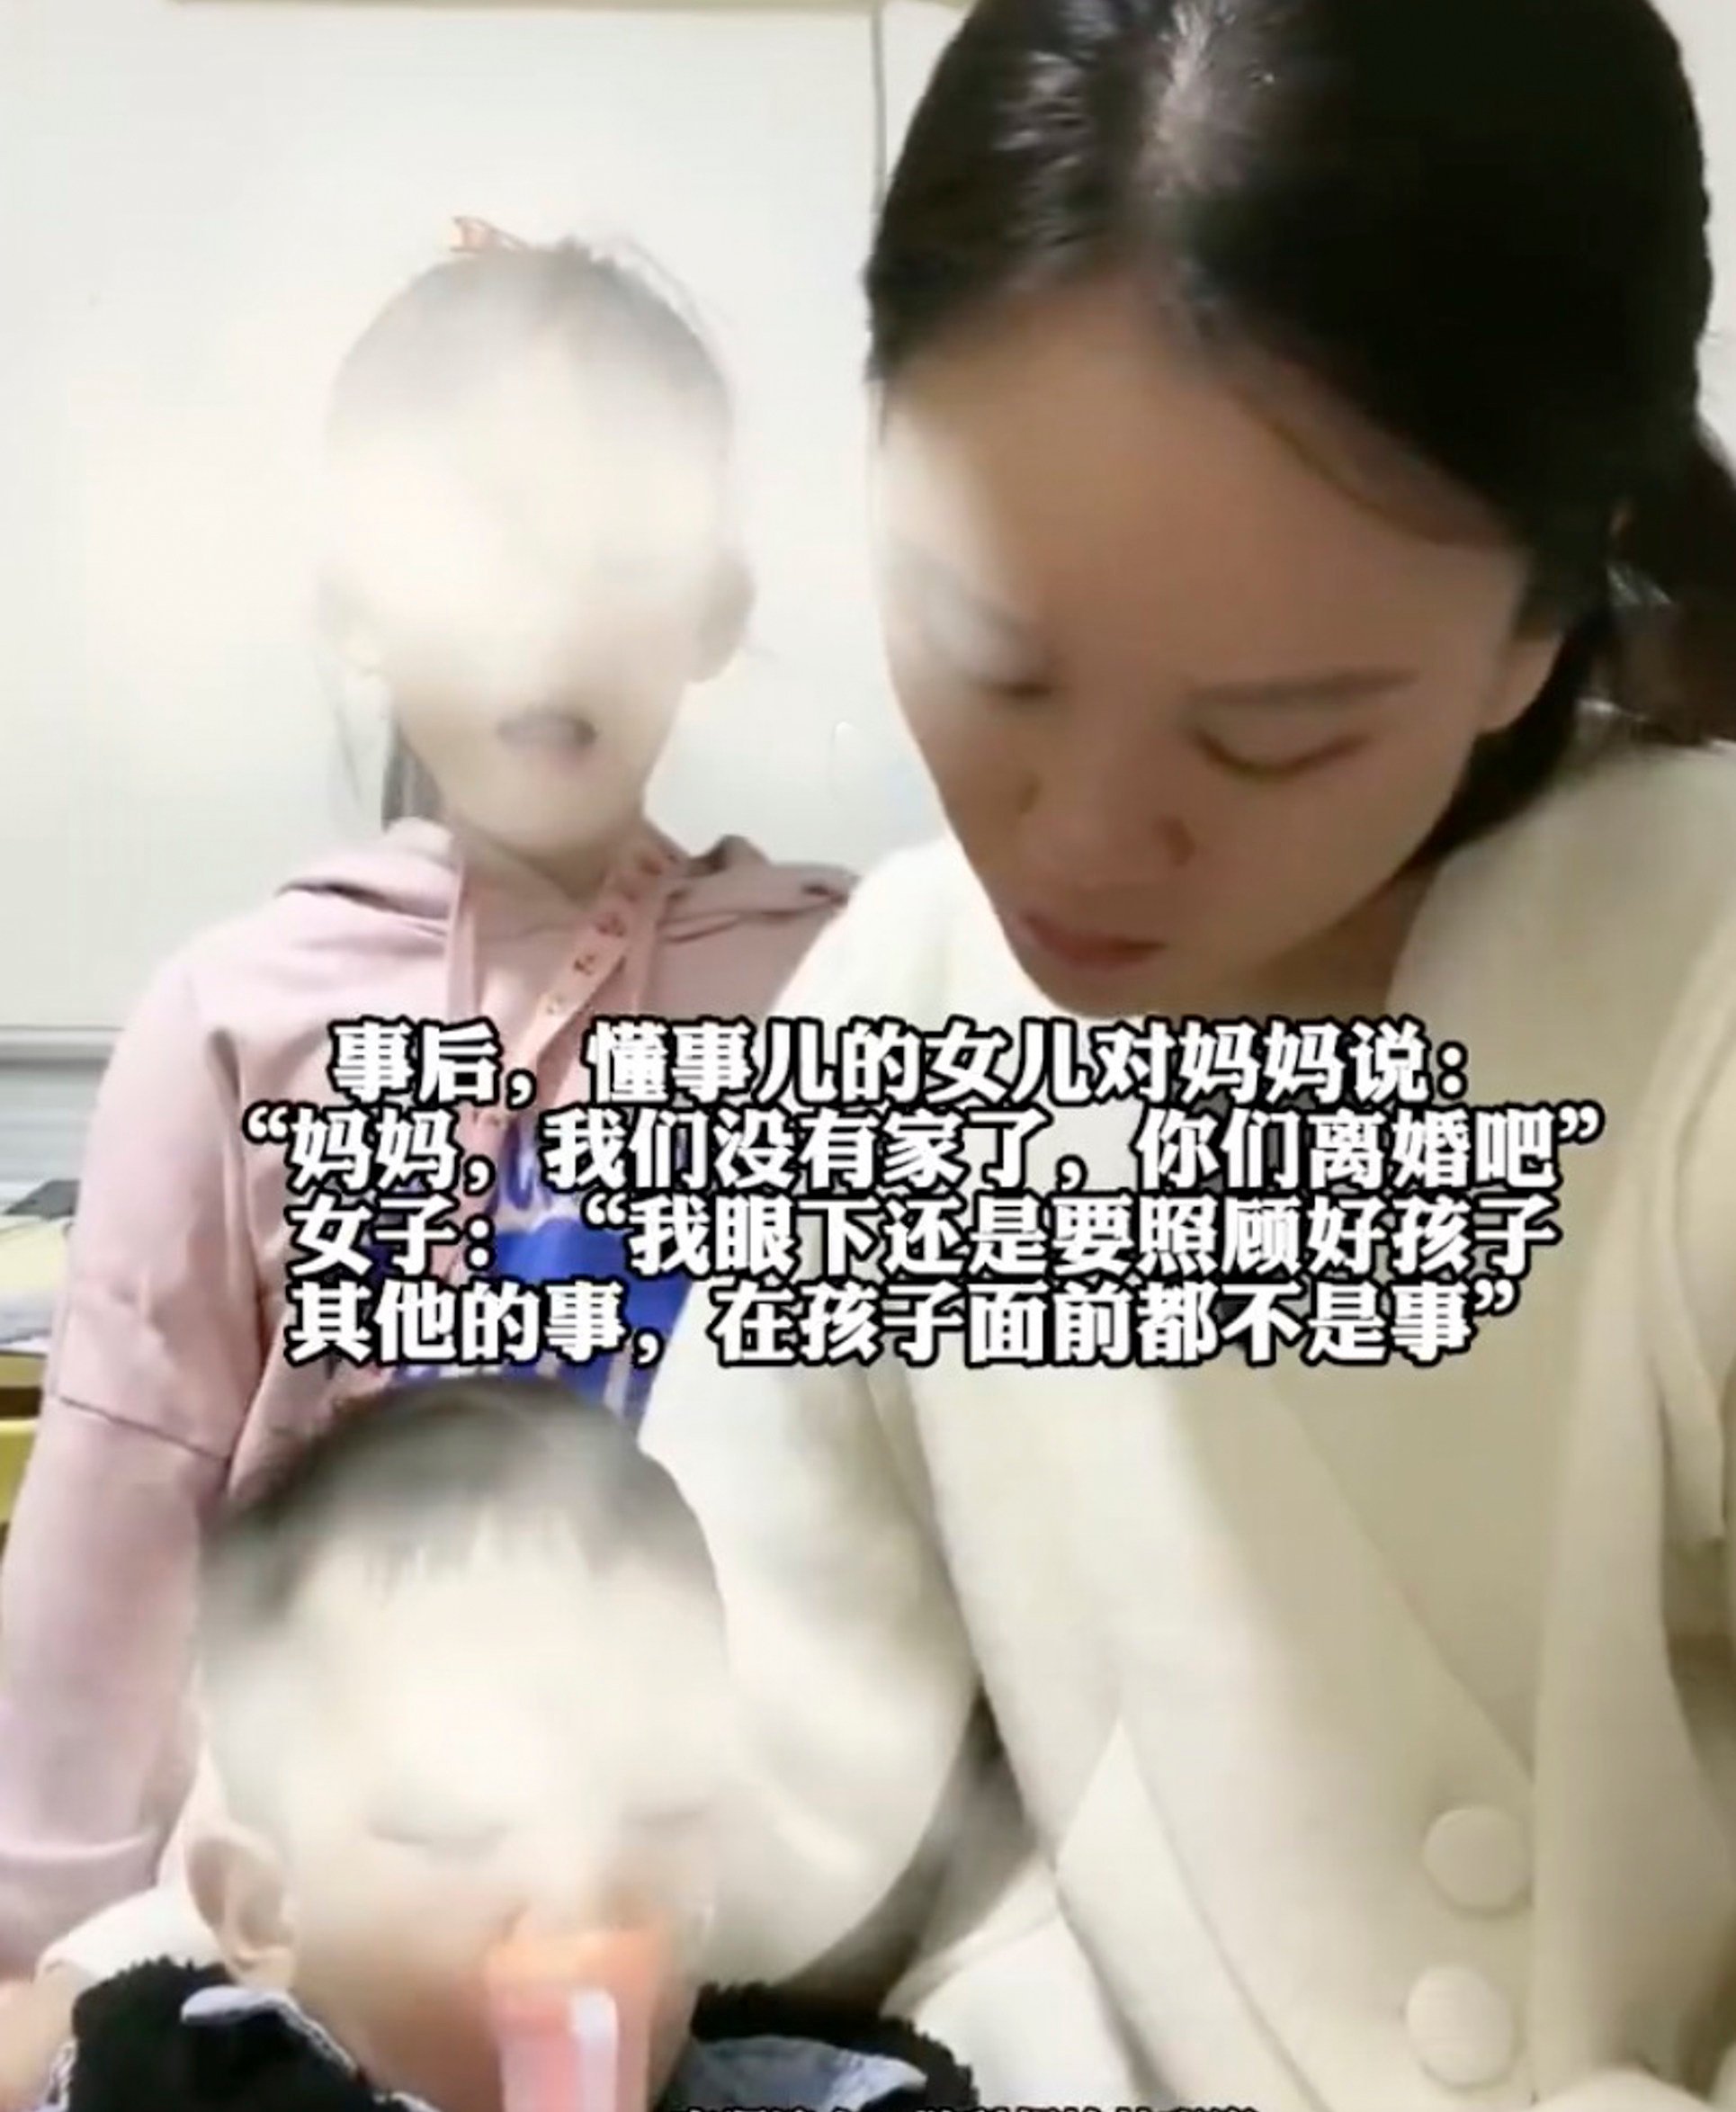 When the girl asked her mother to divorce her violent father, the woman did not respond. Photo: Weibo